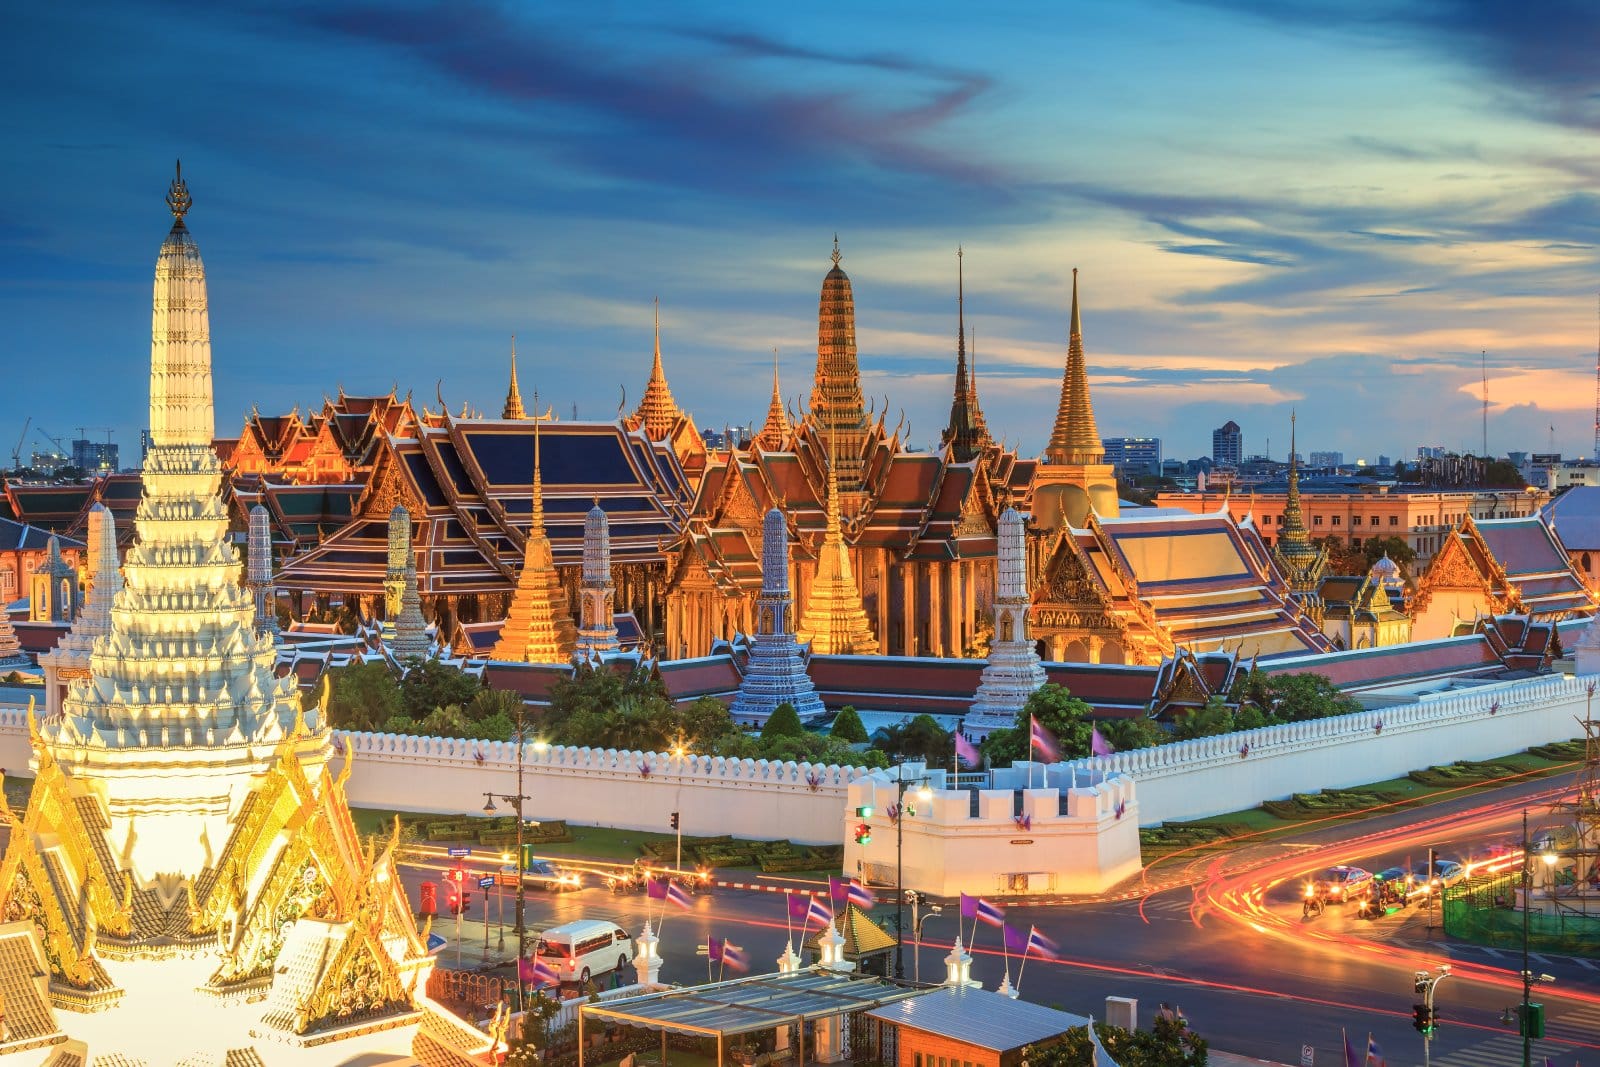 <p class="wp-caption-text">Image Credit: Shutterstock / SOUTHERNTraveler</p>  <p>Immerse yourself in the vibrant streets of Bangkok, tasting street food, exploring markets, and visiting the grandiose Grand Palace.</p>